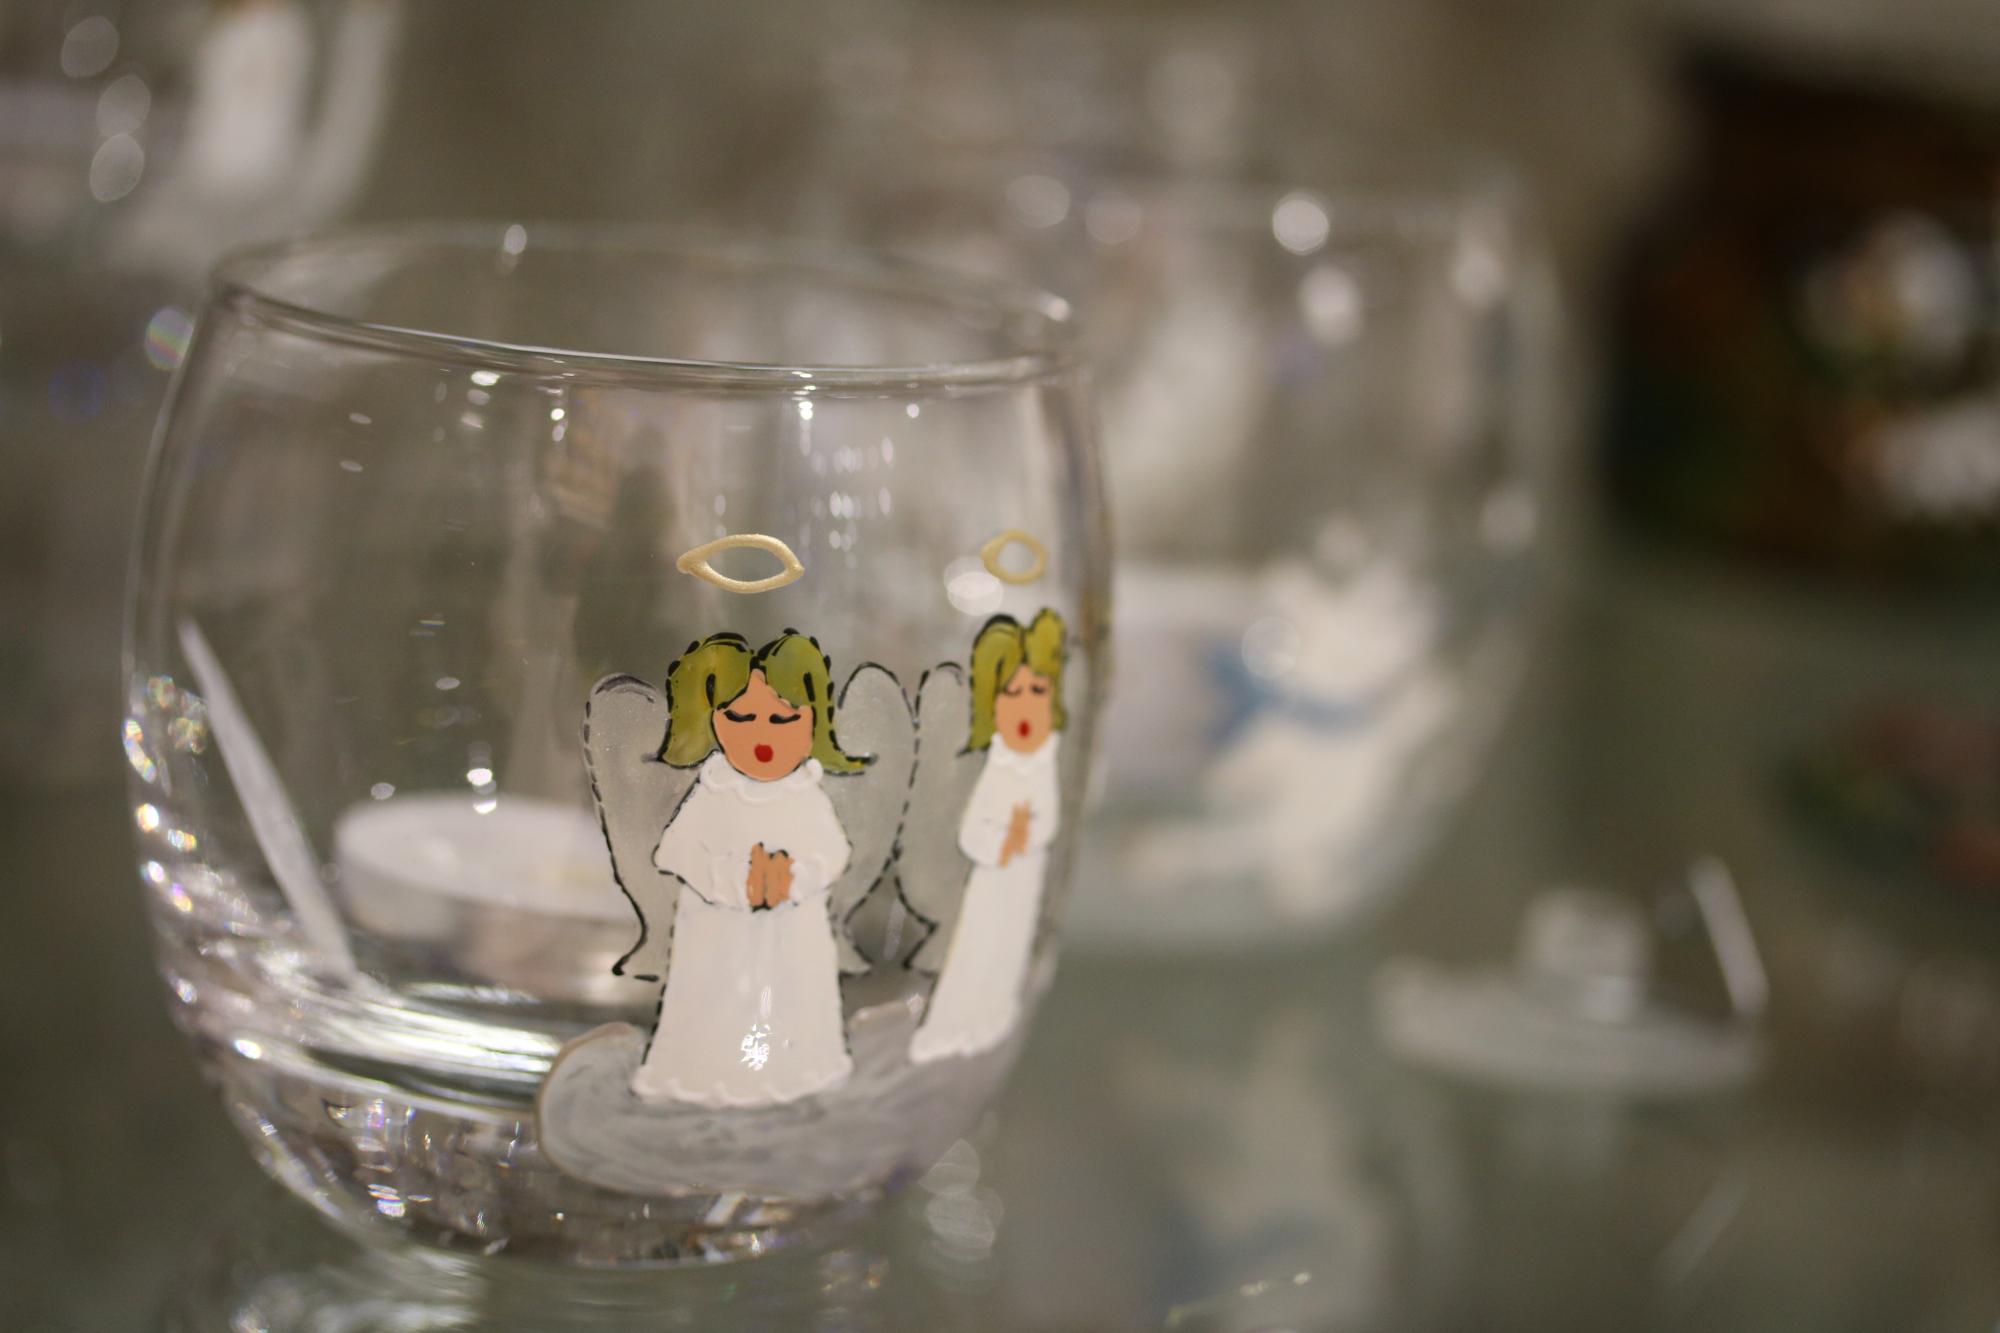 Angels on a glass